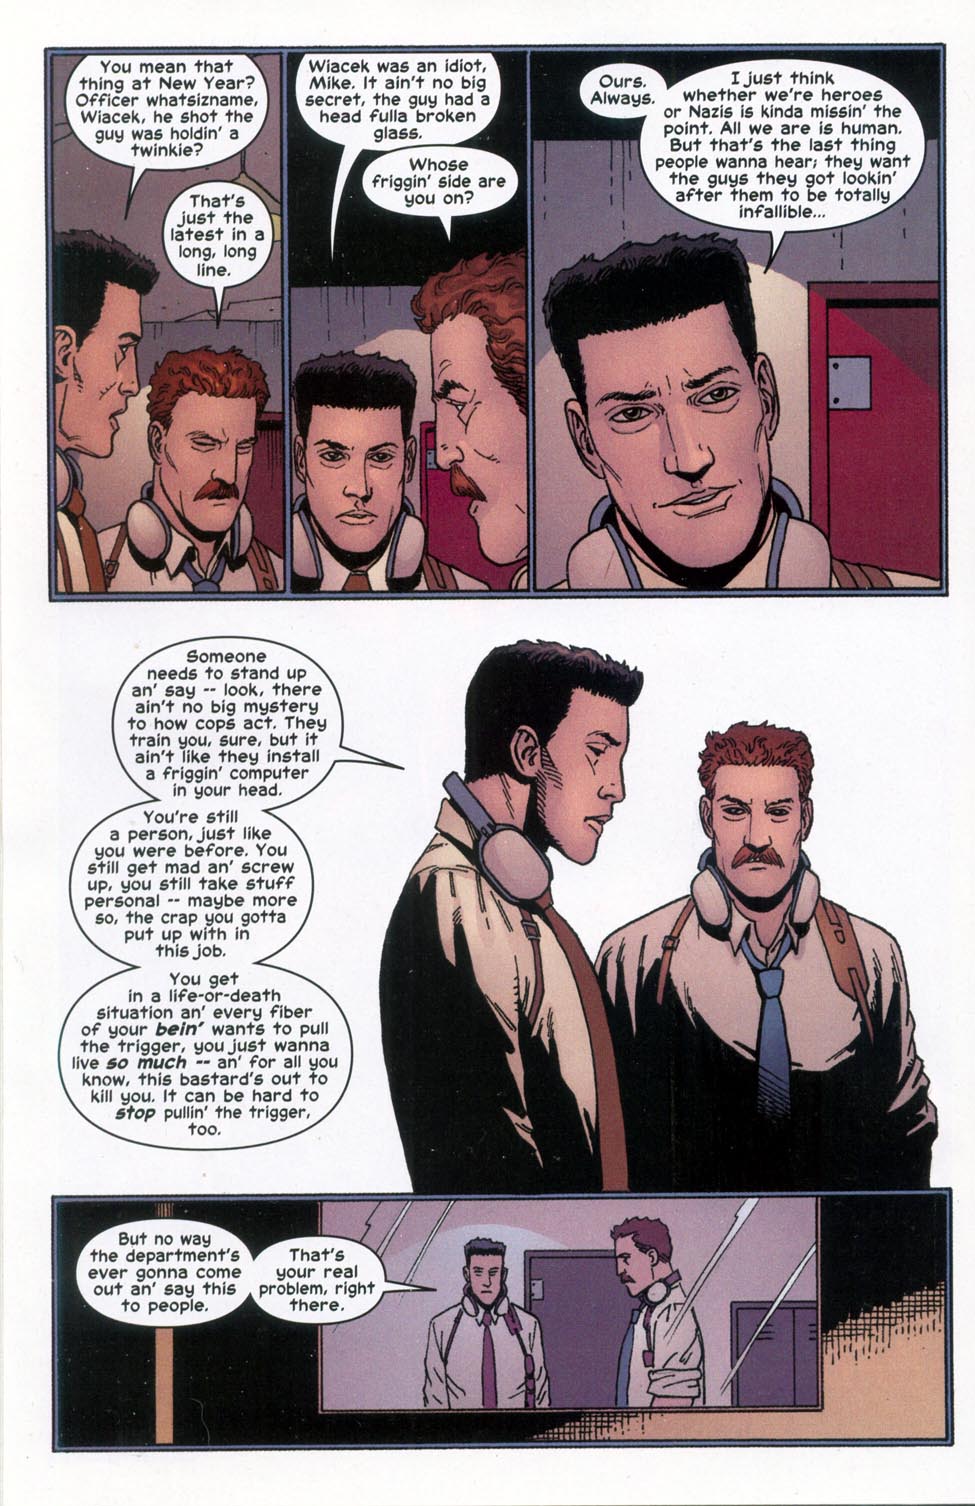 The Punisher (2001) issue 20 - Brotherhood #01 - Page 11